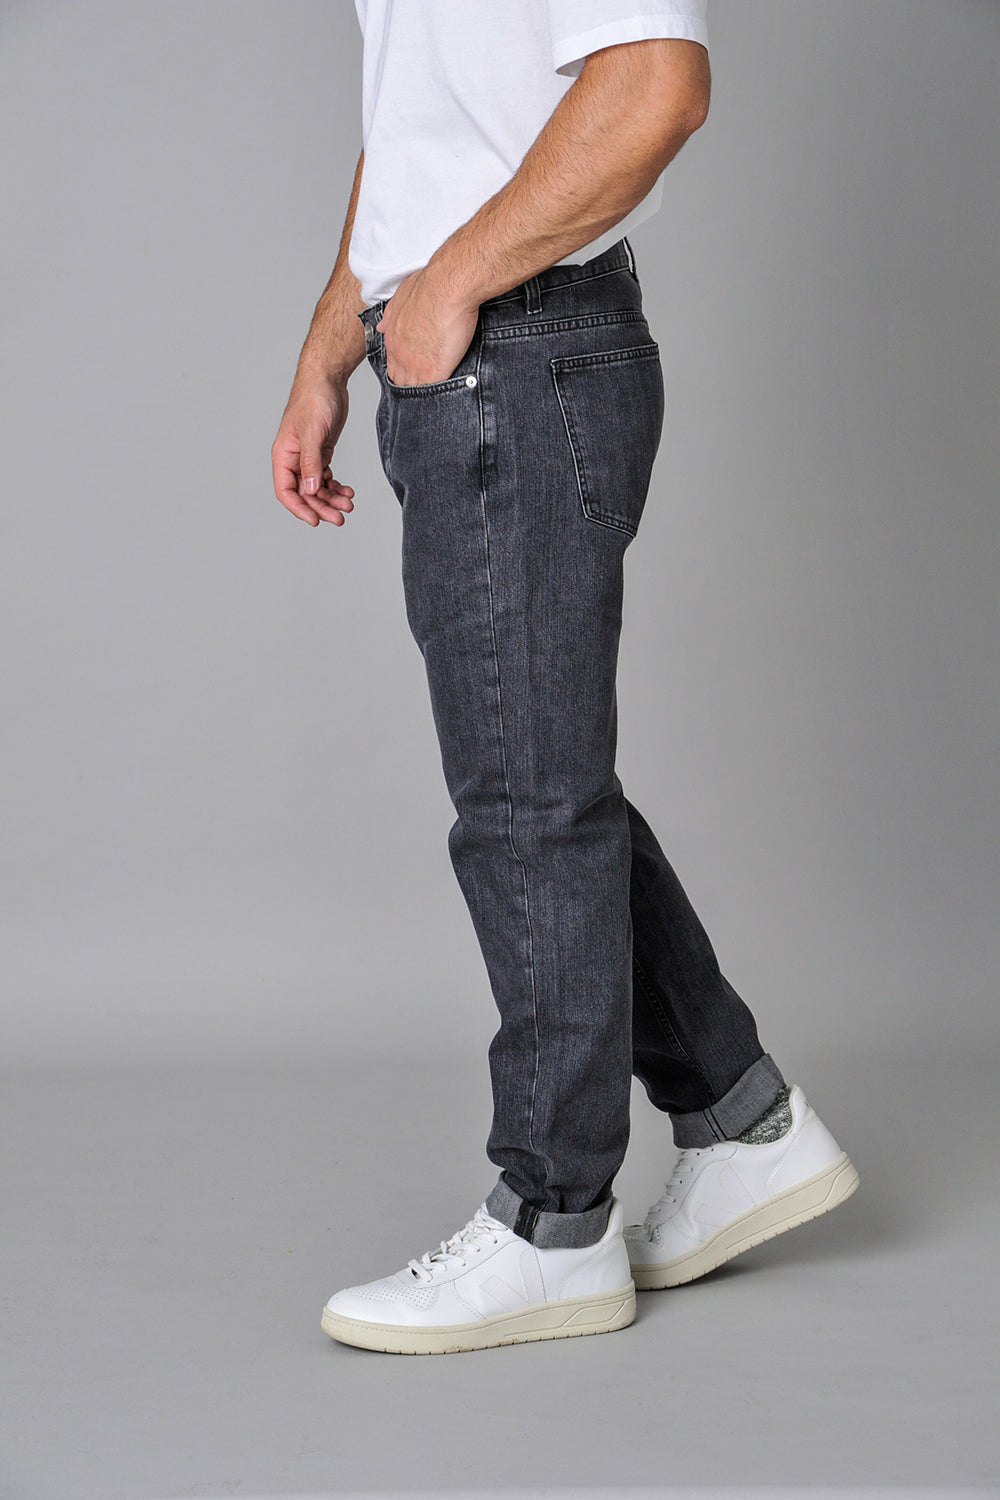 the good neighbour tapered jeans in black